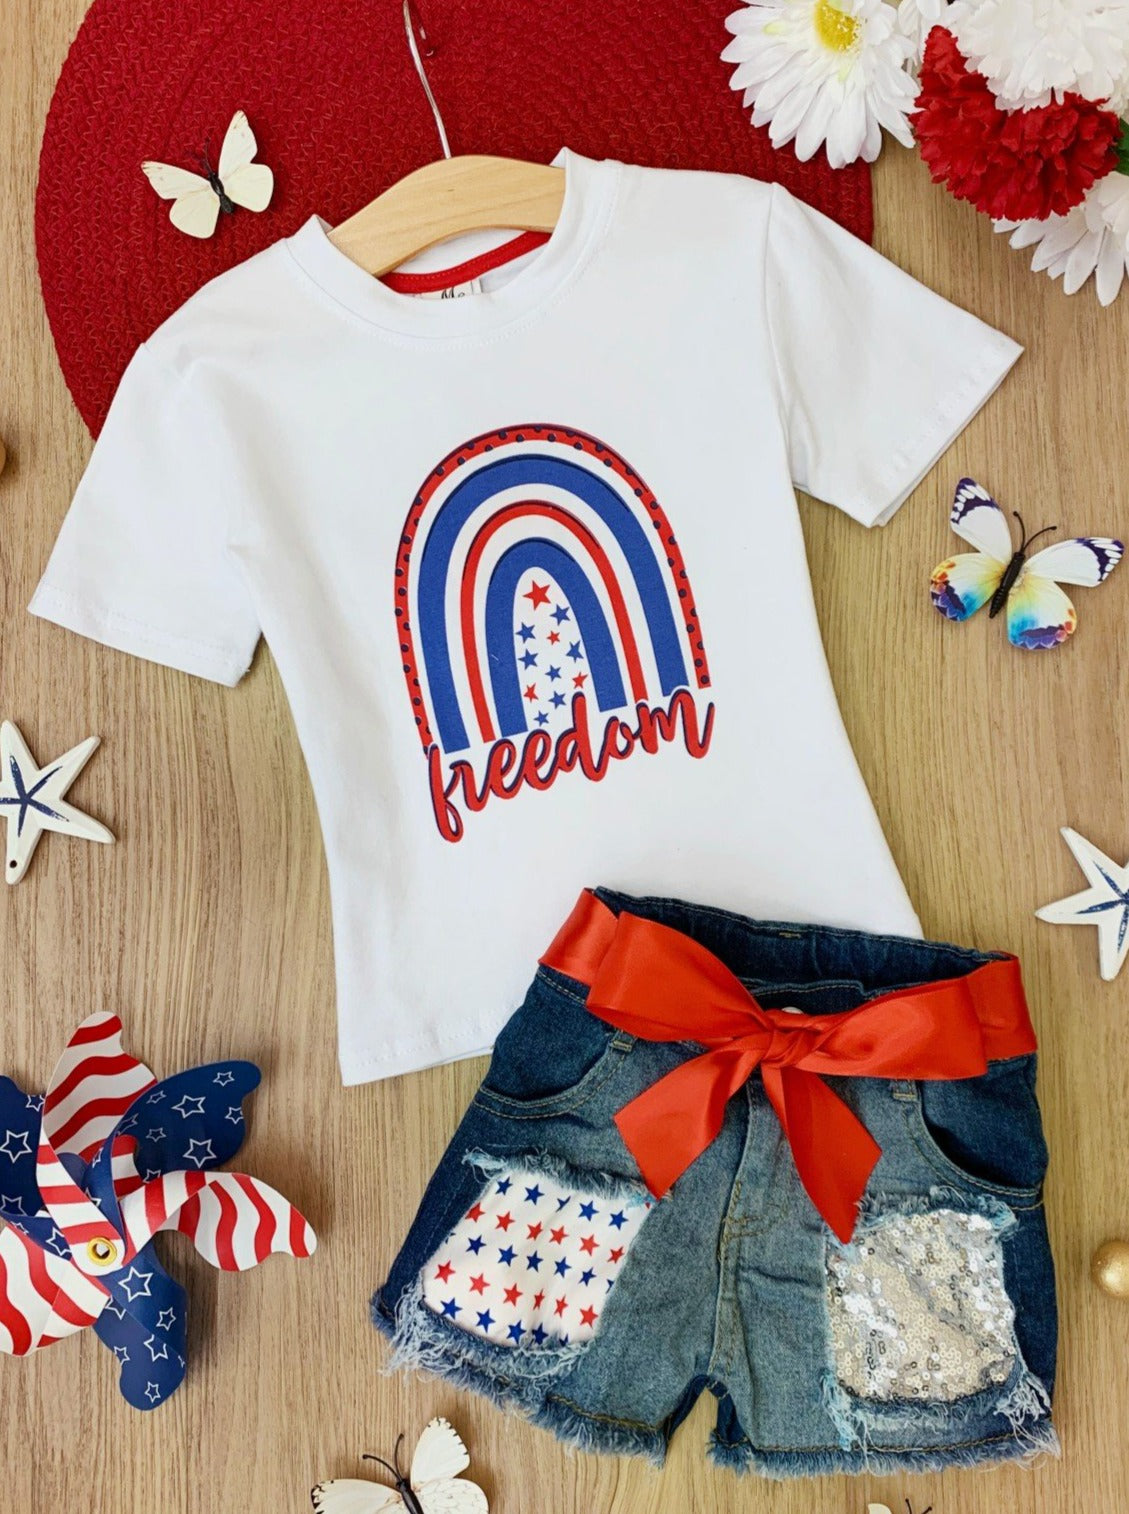 Girls set features a white top with "Freedom" print and patched denim shorts with a red sash